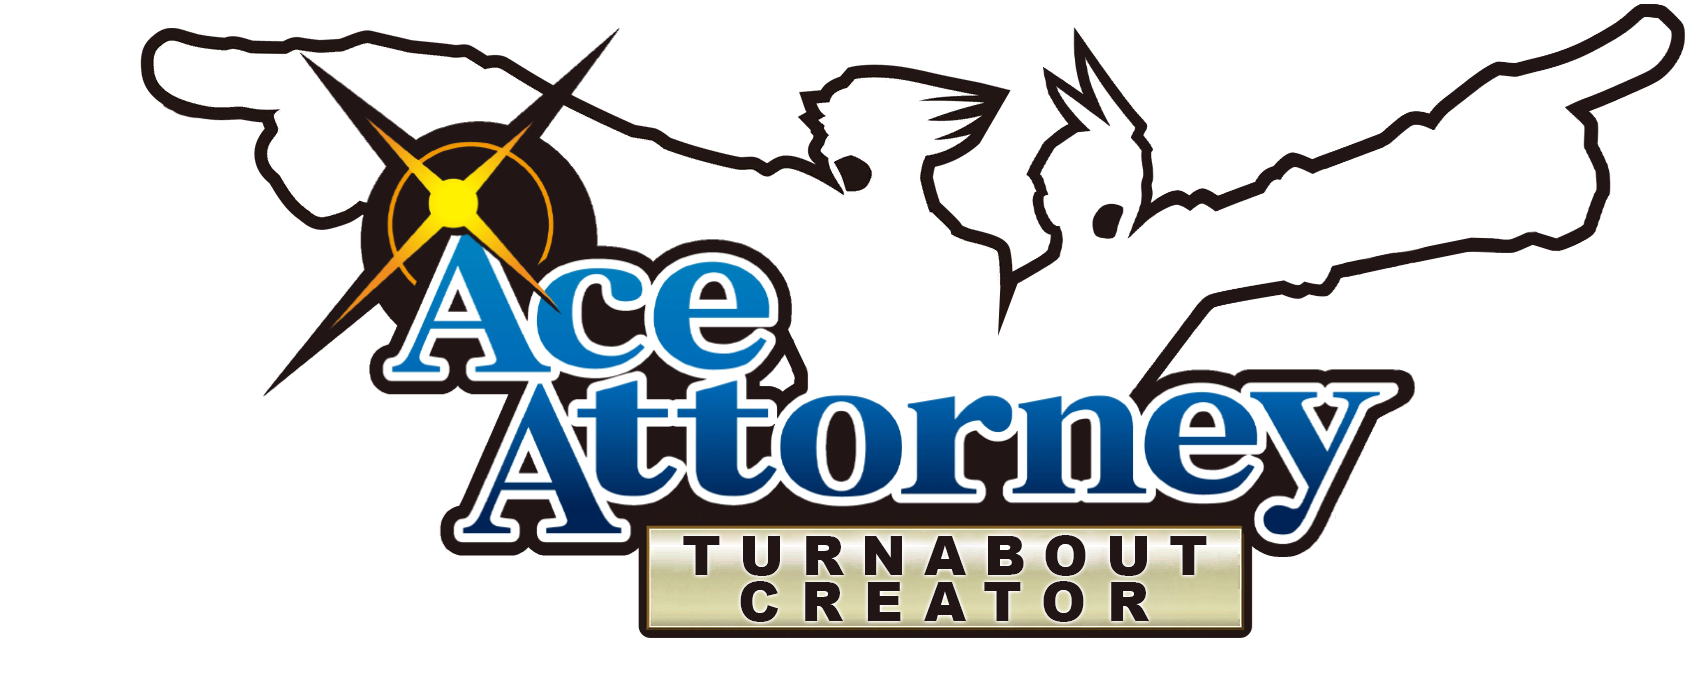 Ace Attorney Turnabout Creator